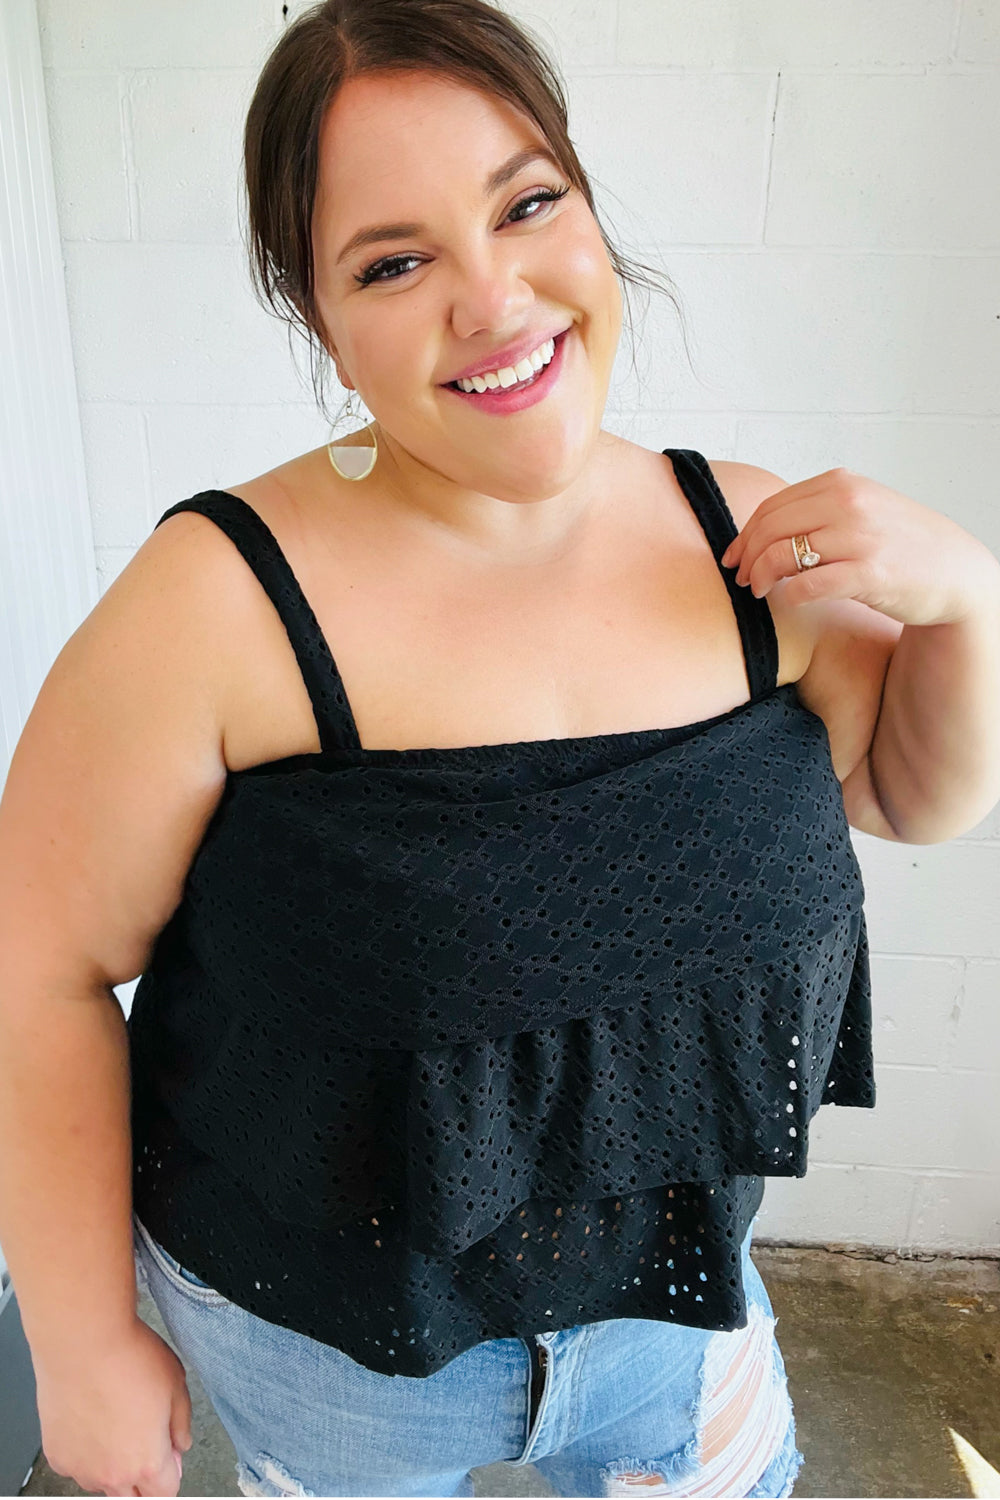 Black Eyelet Tiered Sleeveless Lined Top